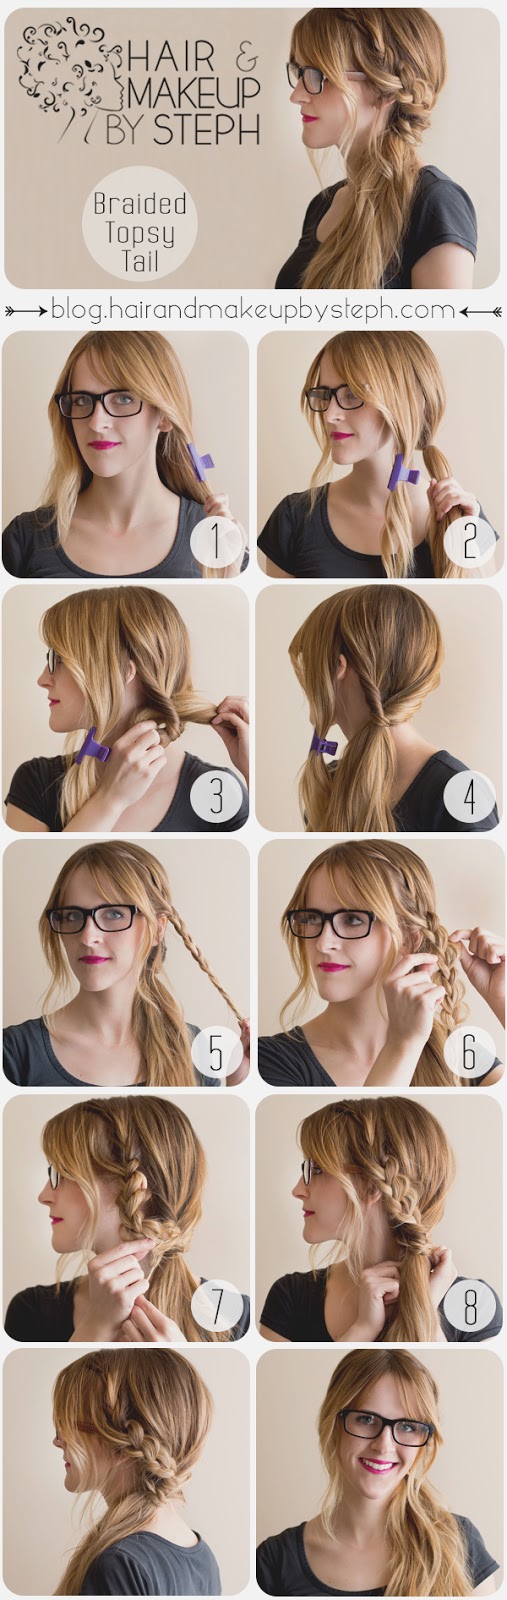 Stunning Side Hairstyle Tutorials That Will Make You Look Gorgeous